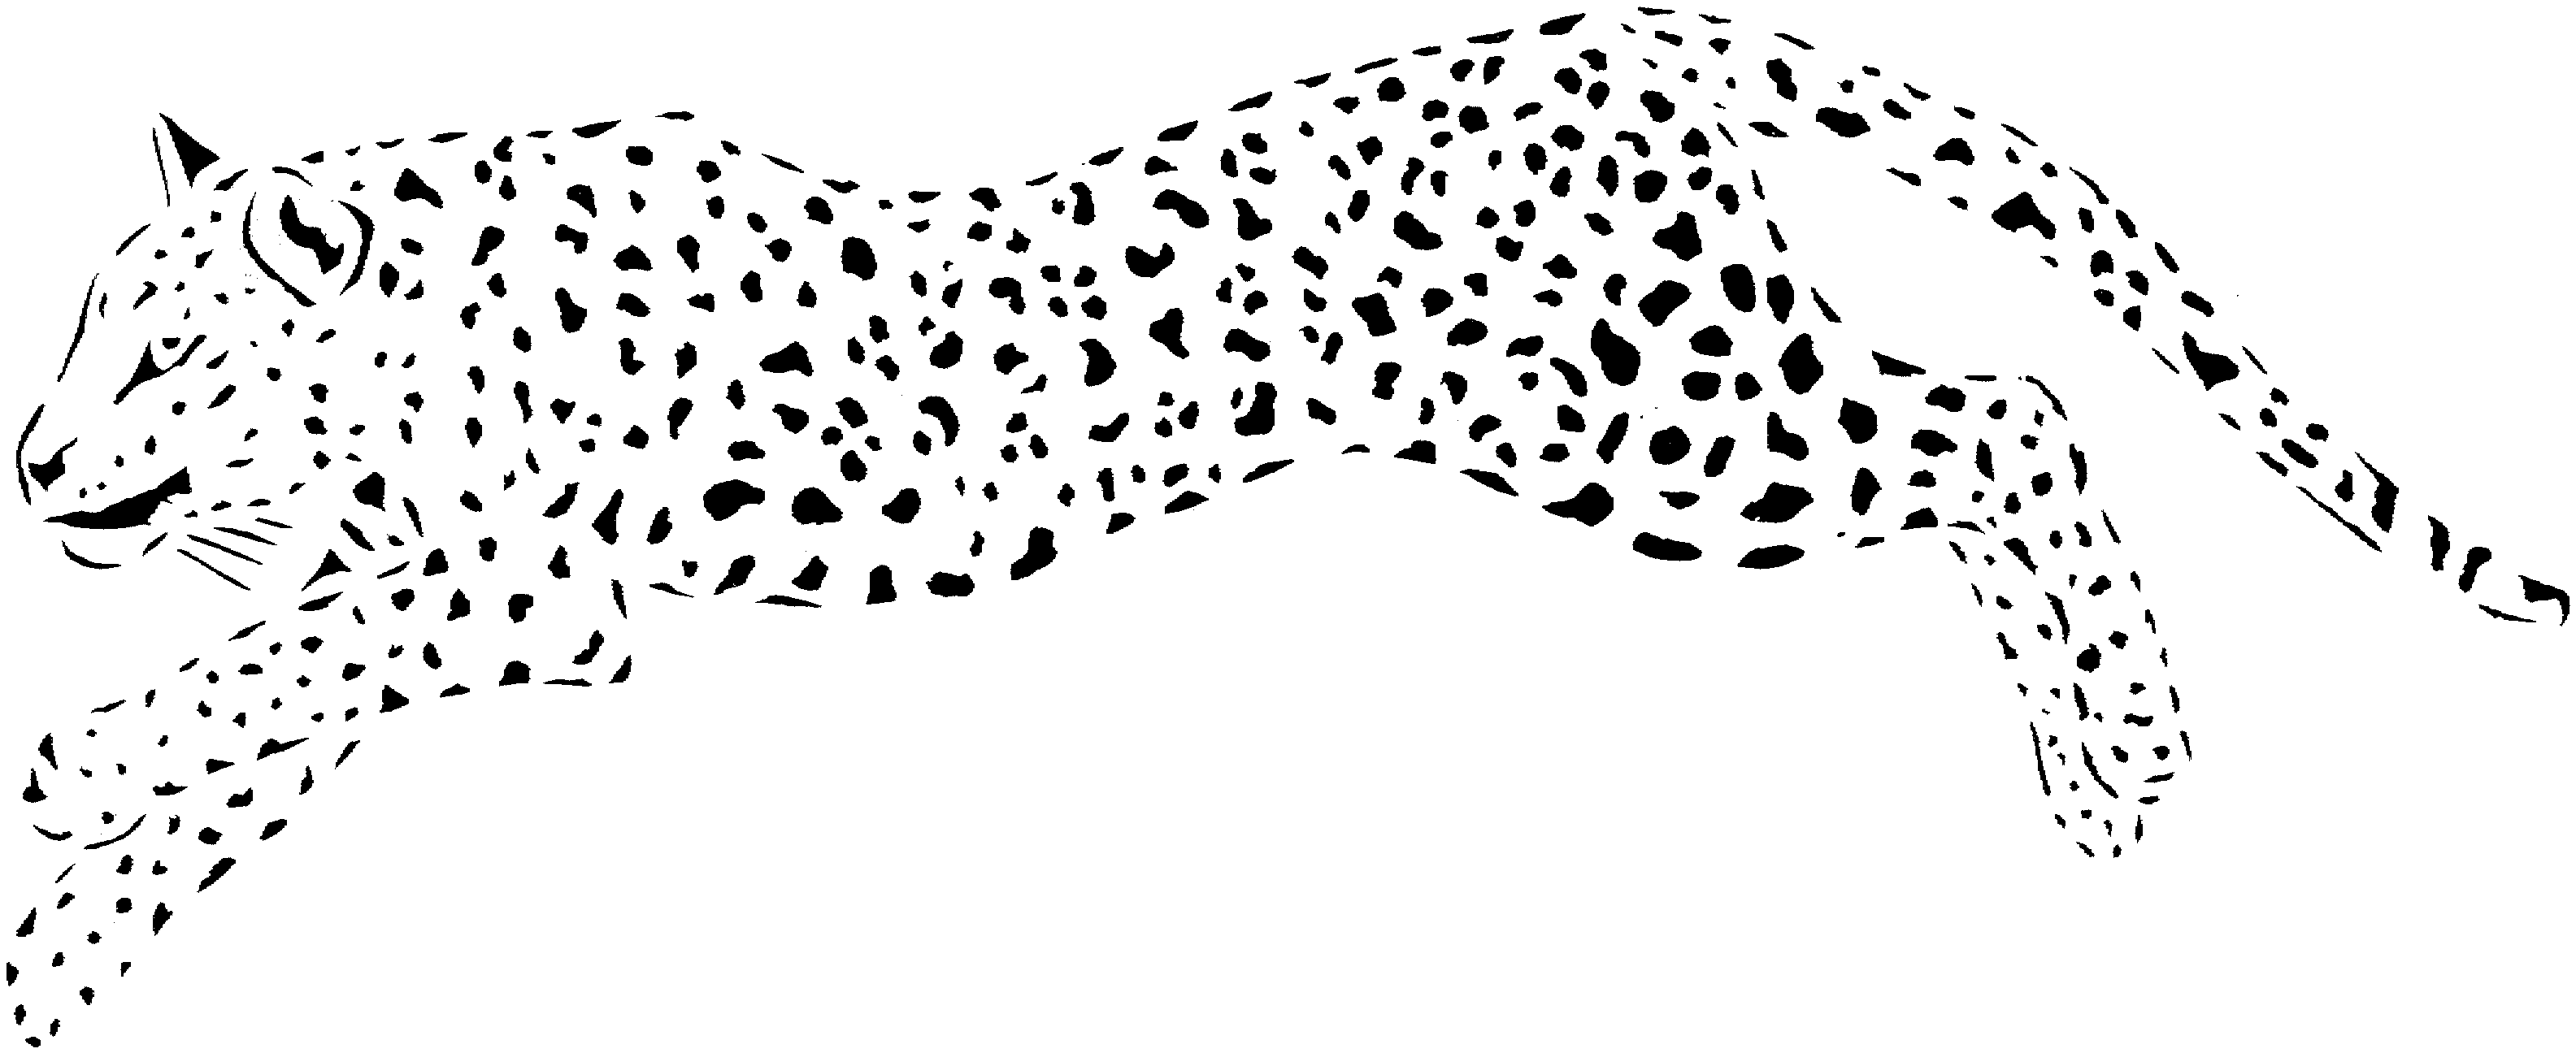 Free Cheetah Coloring Pages